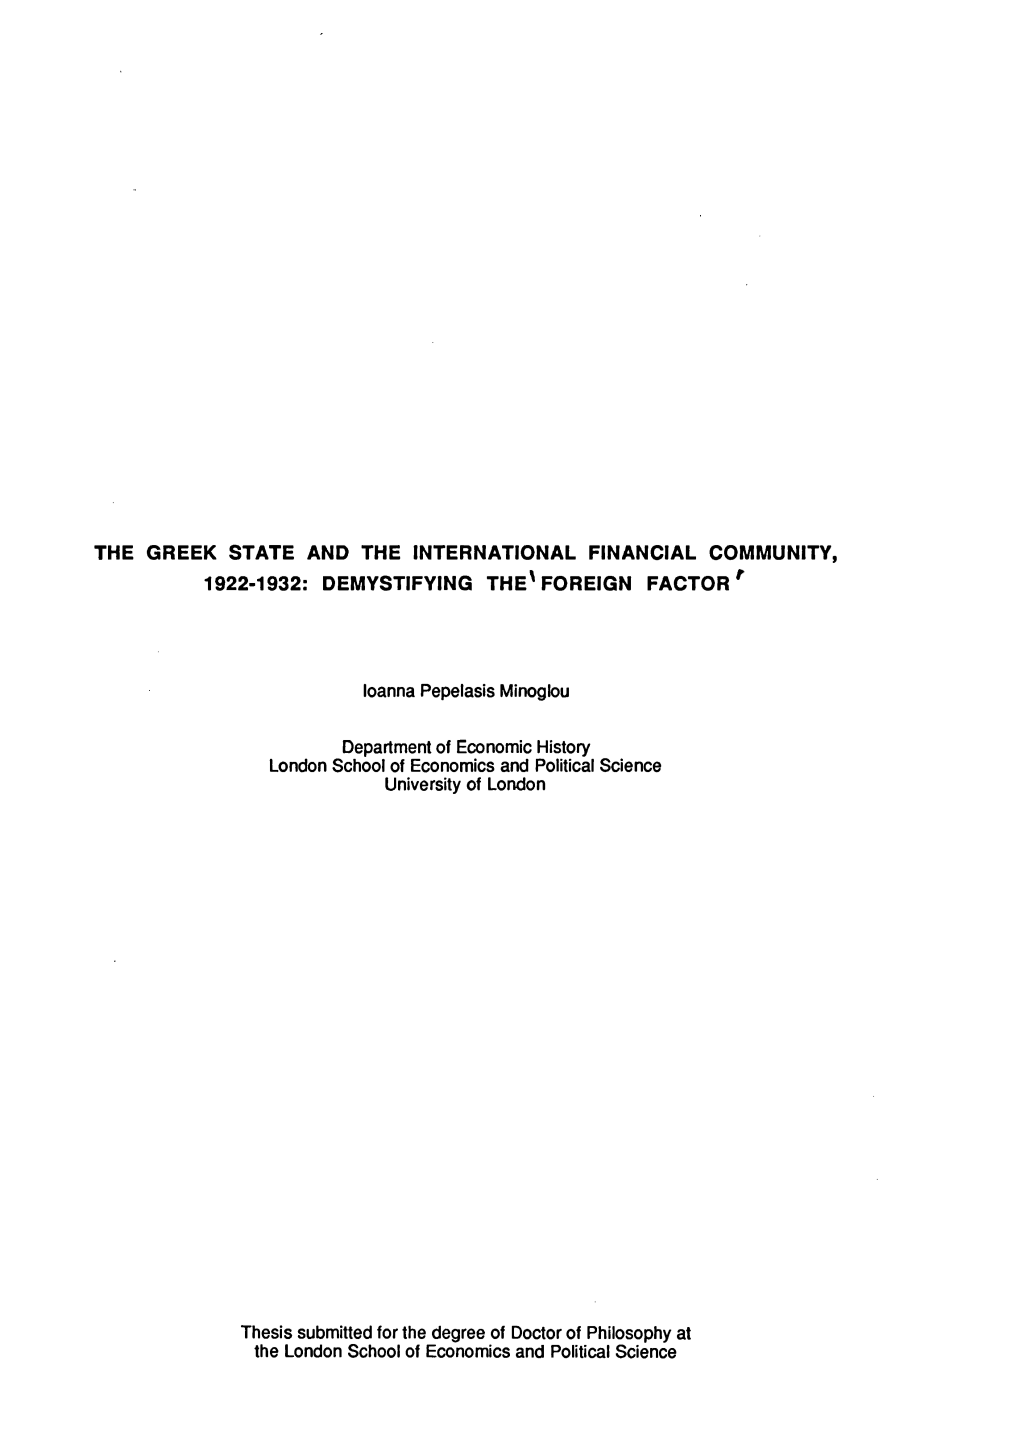 THE GREEK STATE and the INTERNATIONAL FINANCIAL COMMUNITY, 1922-1932: DEMYSTIFYING THE'foreign FACTOR R